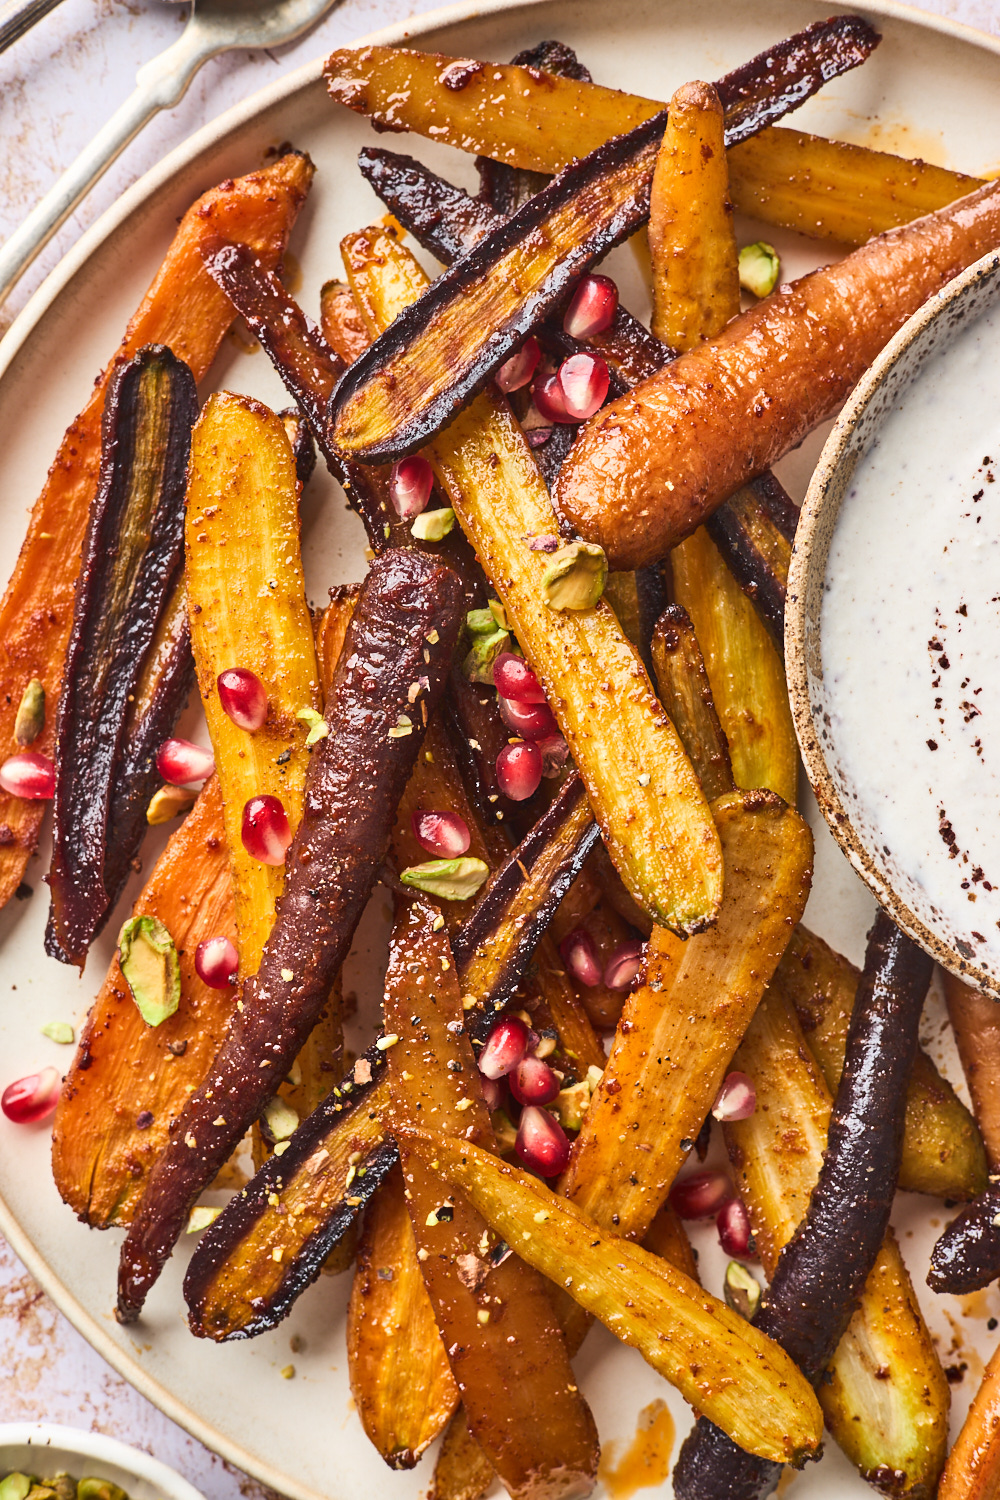 Spiced Roasted Carrots With Sumac Whipped Feta